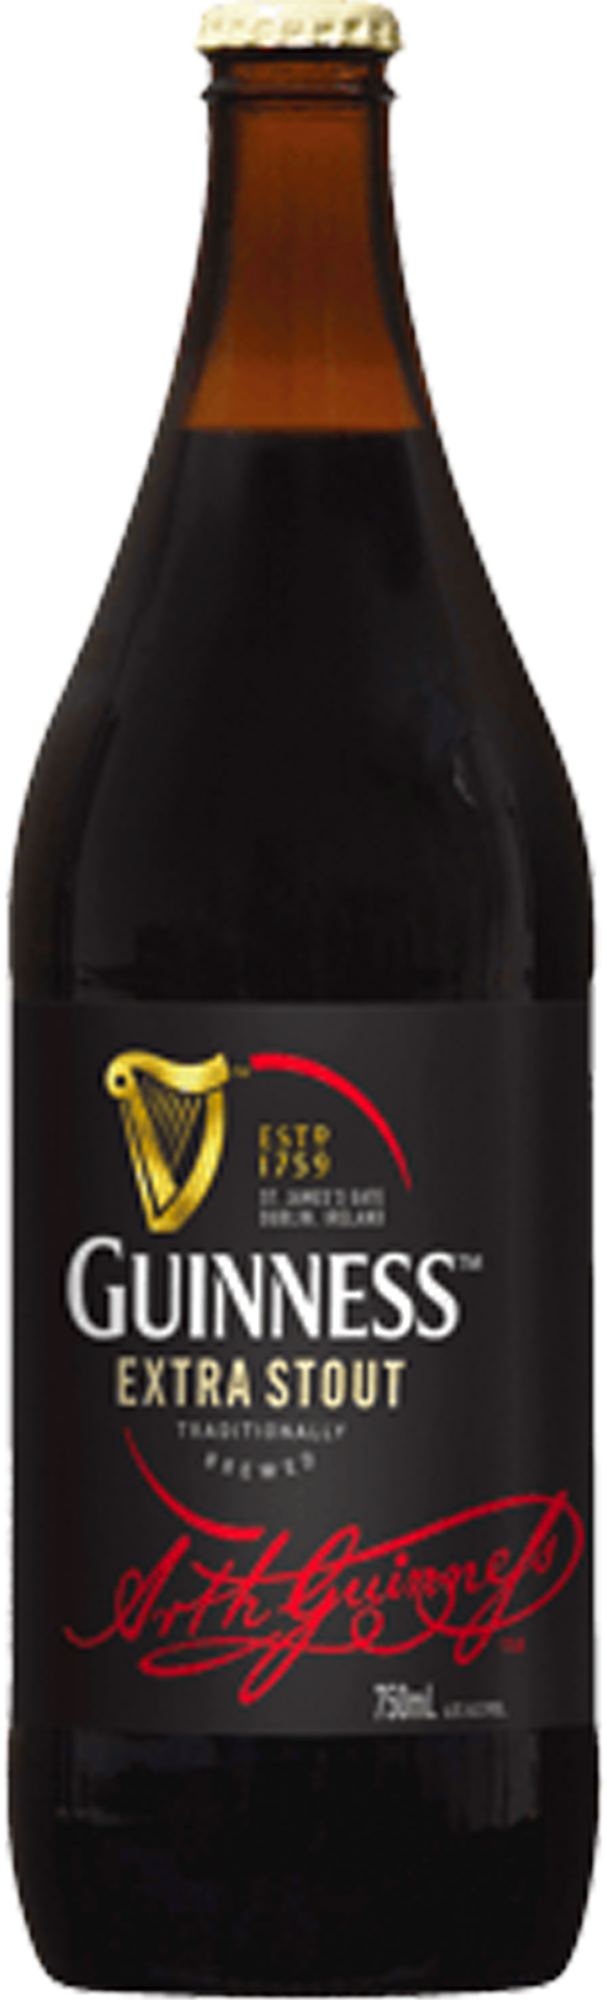 Guinness Extra Stout 750ml